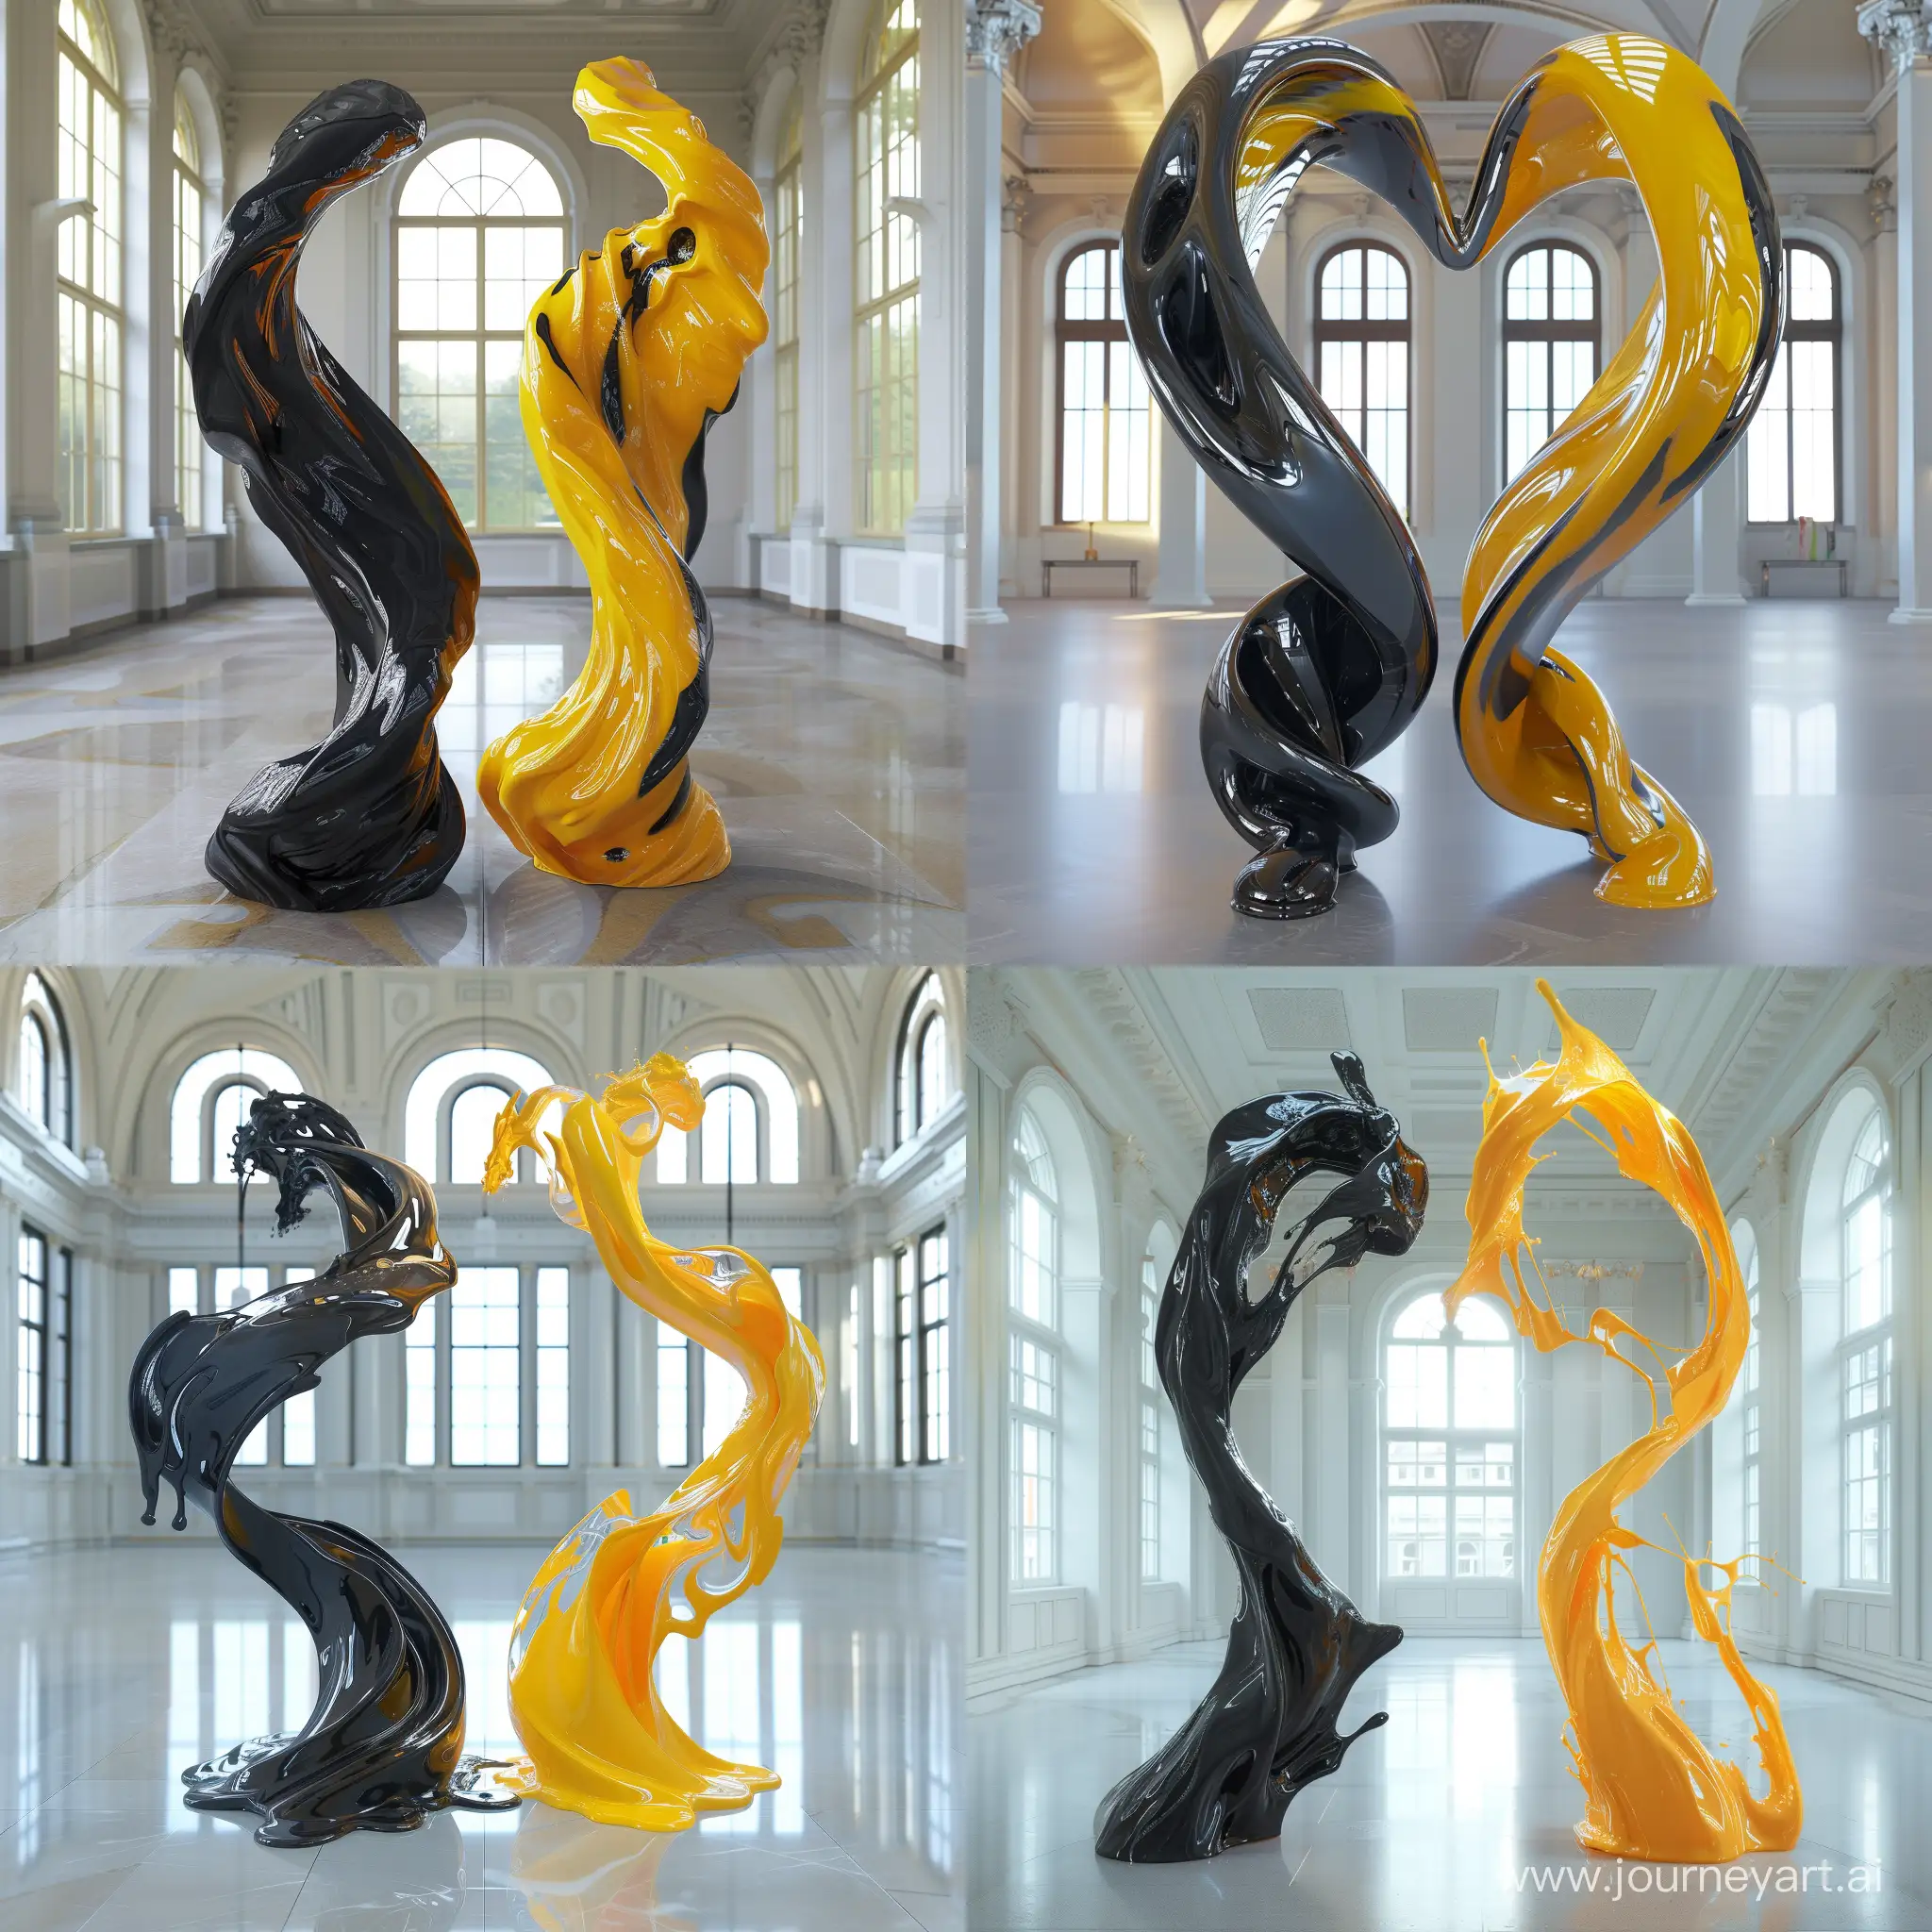 Twisting-Abstract-Liquids-Dynamic-Interplay-of-Pitch-Black-and-Sun-Yellow-Paint-in-Museum-Hall